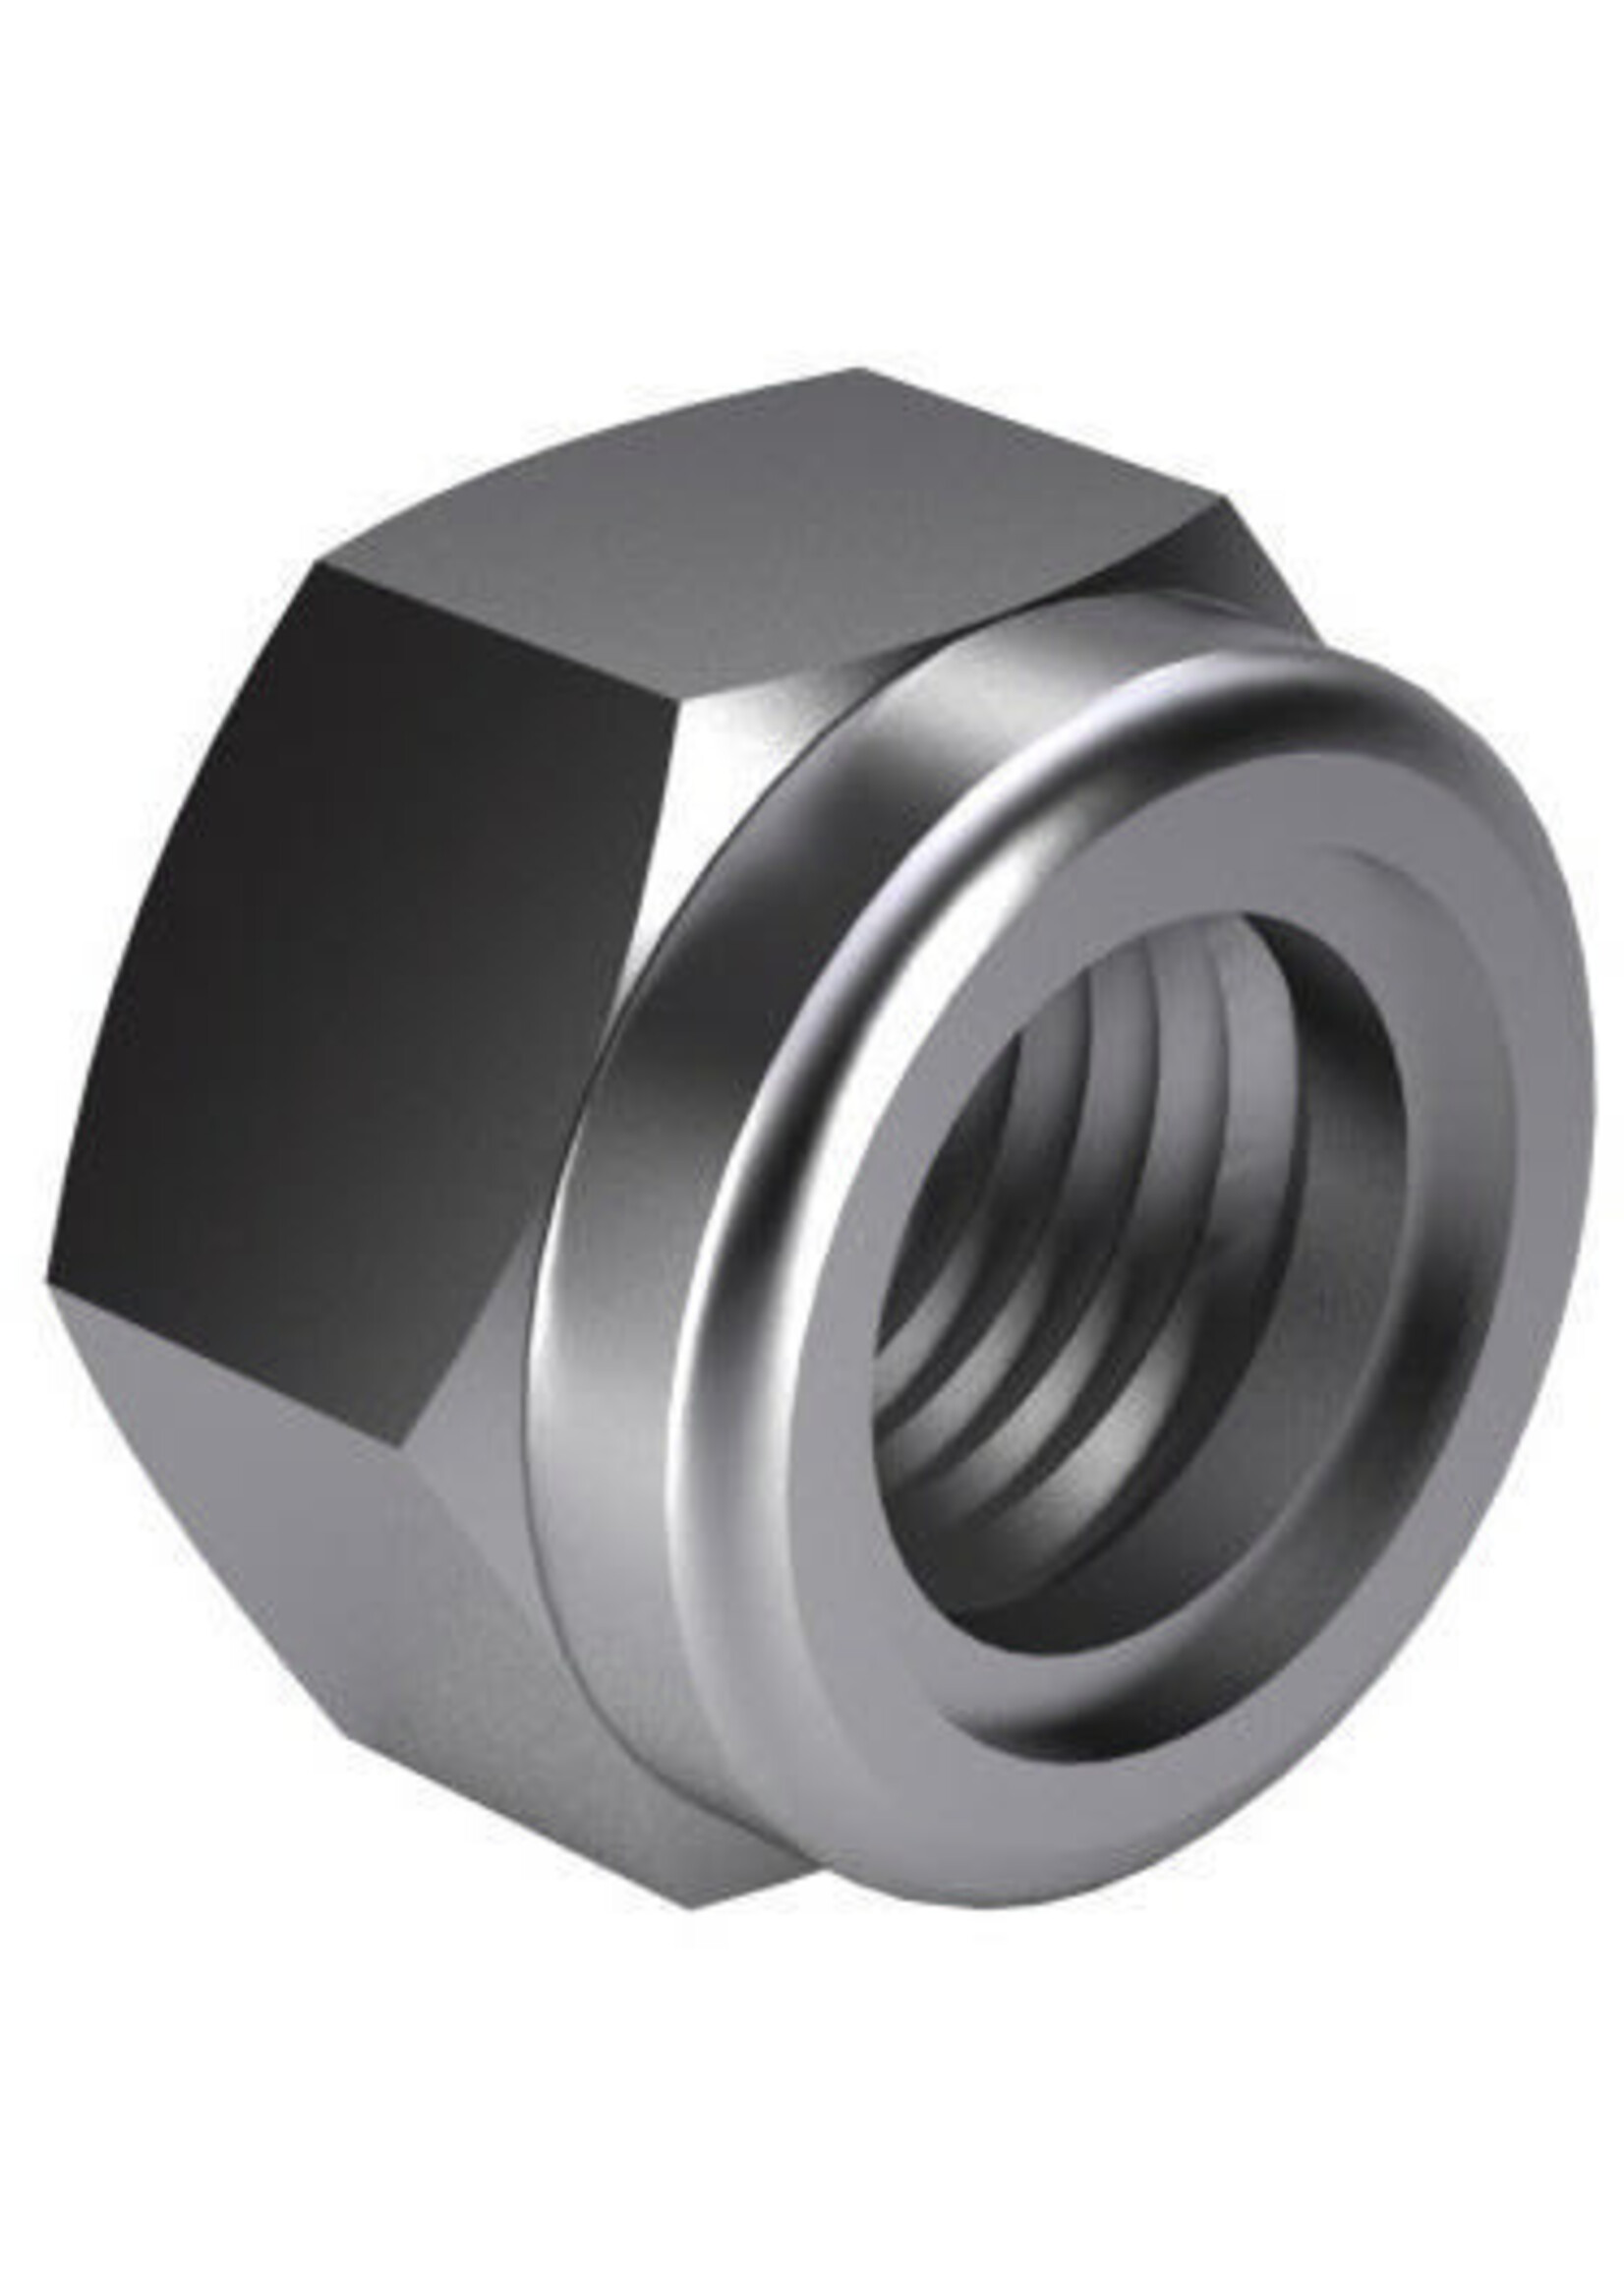 Universal Parts Self-locking hex nut with plastic washer MF DIN 985 Steel Electrolytically zinc plated |8| M14X1.50